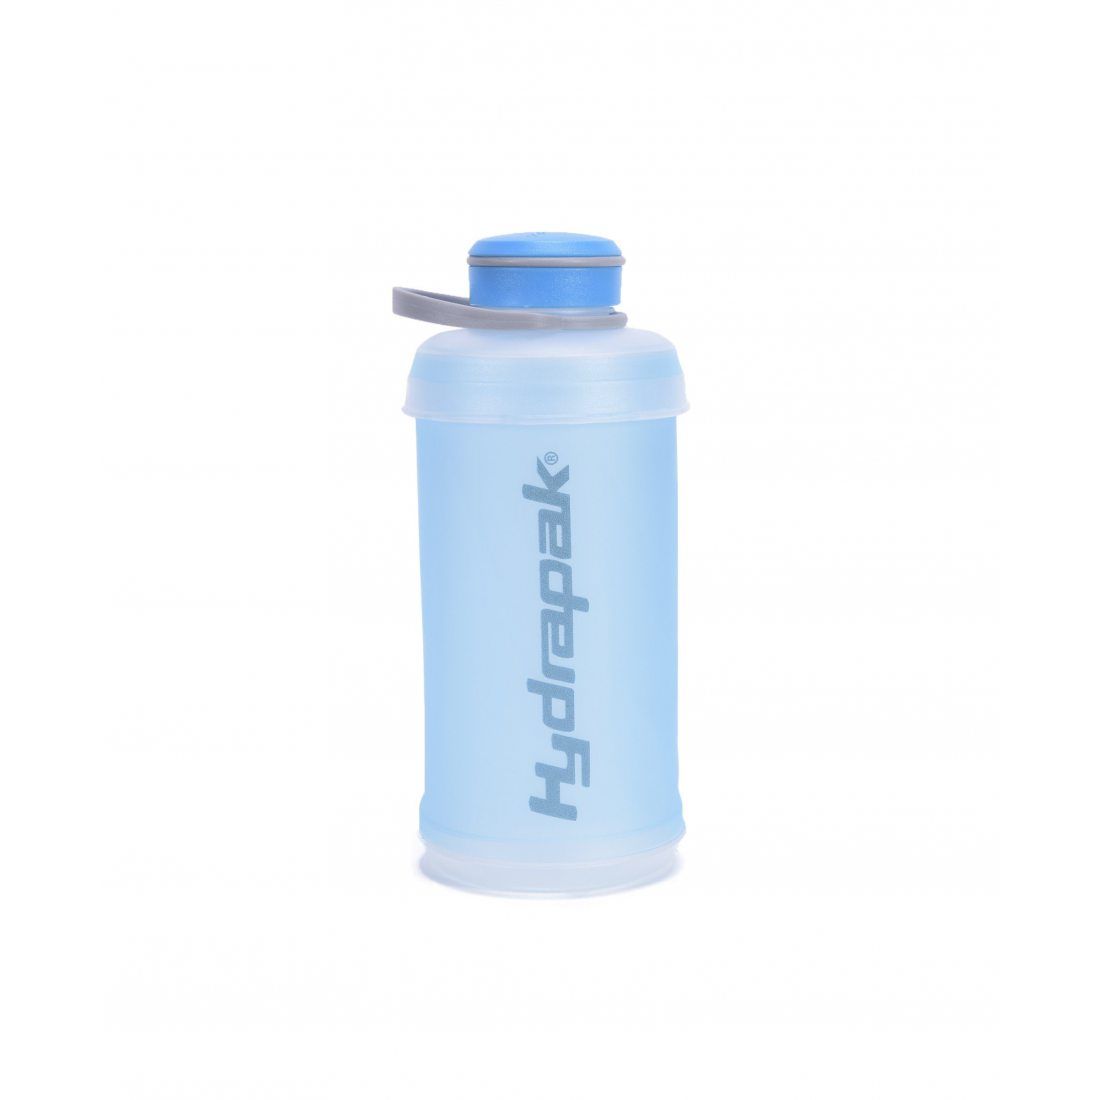 HYDRAPAK STASH 750 COLLAPSIBLE WATER BOTTLE 750 ML (BLUE)